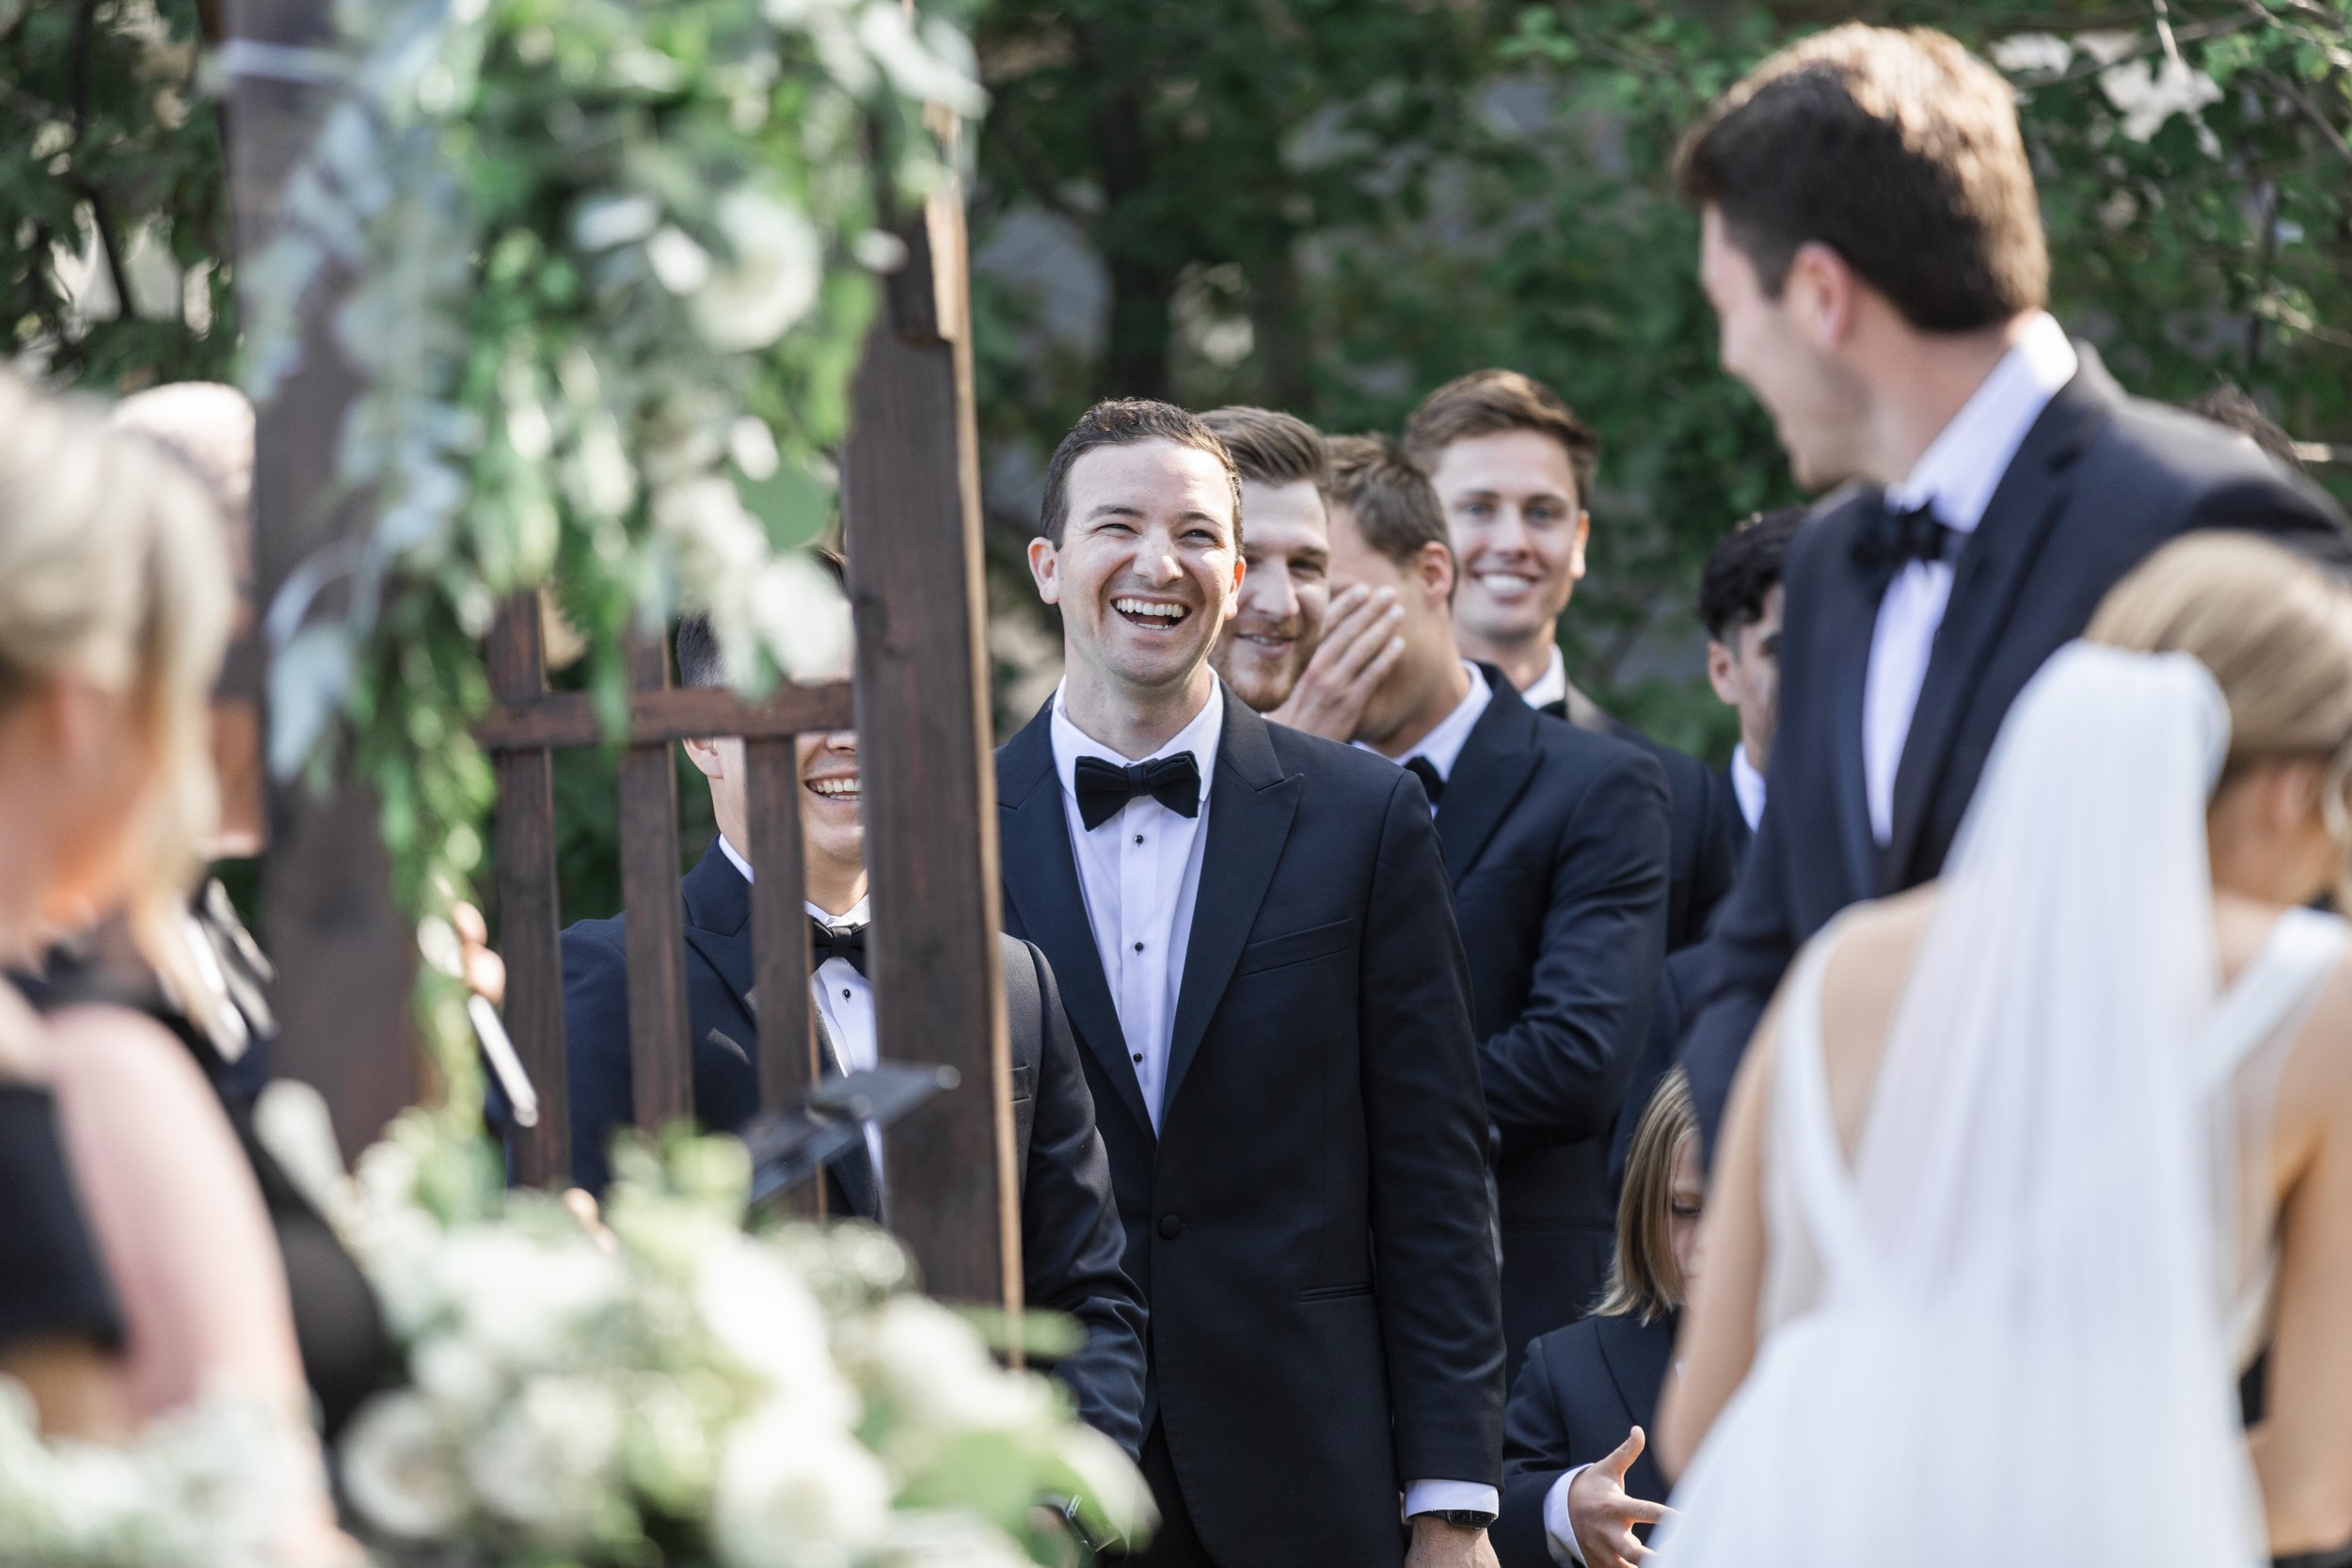  During a lakeside wedding, Savanna Richardson Photography captures the groomsmen laughing during the ceremony. groomsmen candids wedding near water #savannarichardsonphotography #tahoewedding #lakesidewedding #outdoorwedding #summerwedding #laketaho